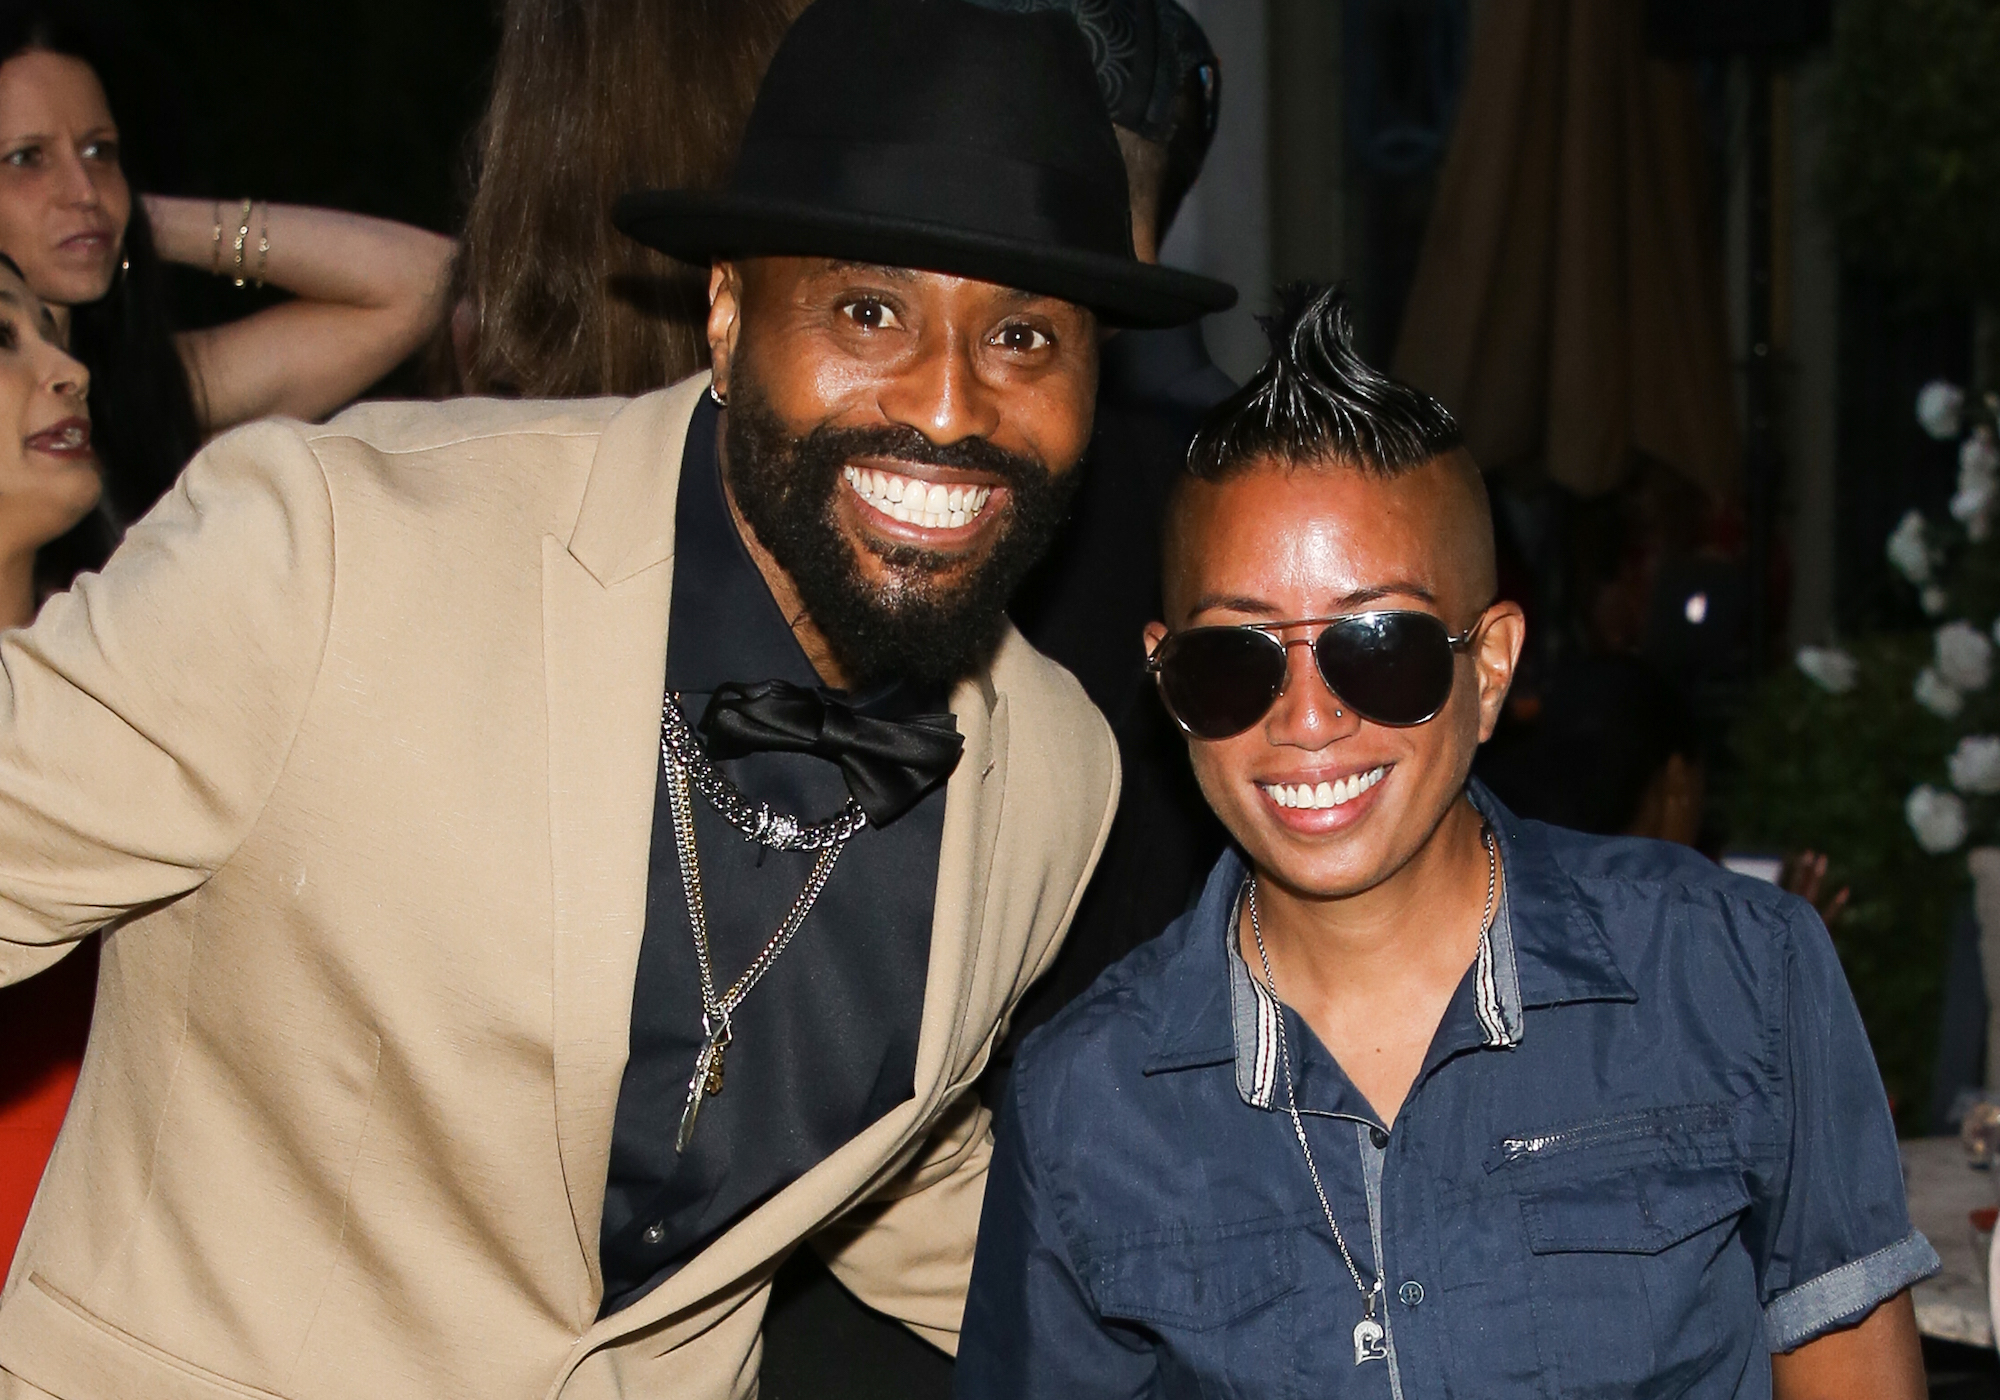 Syrus Yarbrough (L) and Ruthie Alcaide smiling as they attend the Reality Rushmore: Paramount+ MTV's 'The Challenge' reunion event  